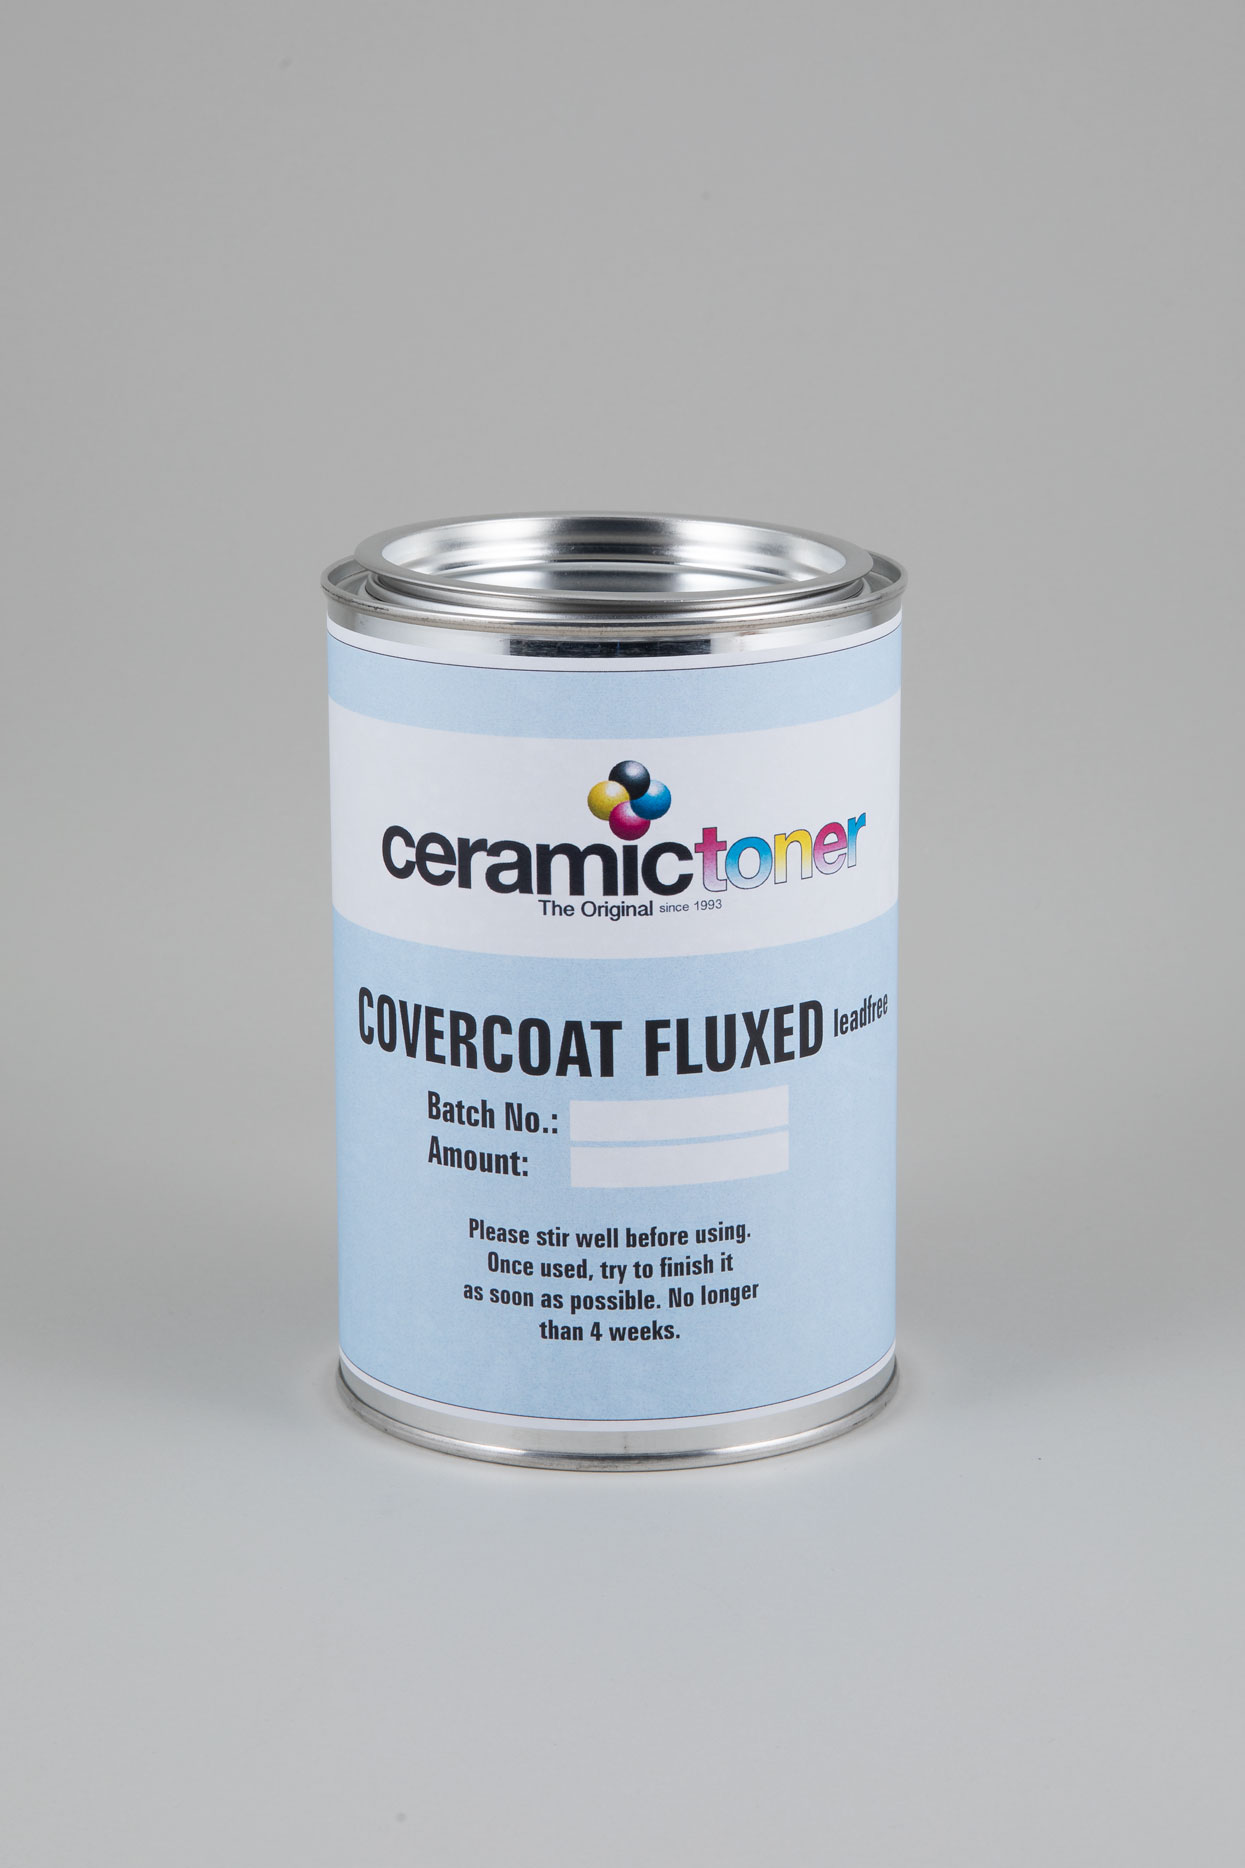 Ceramictoner Covercoat Fluxed Leadfree is a coating with lead-free flux. The coating comes in a can and is suitable for all areas of application. The coating is bluish...